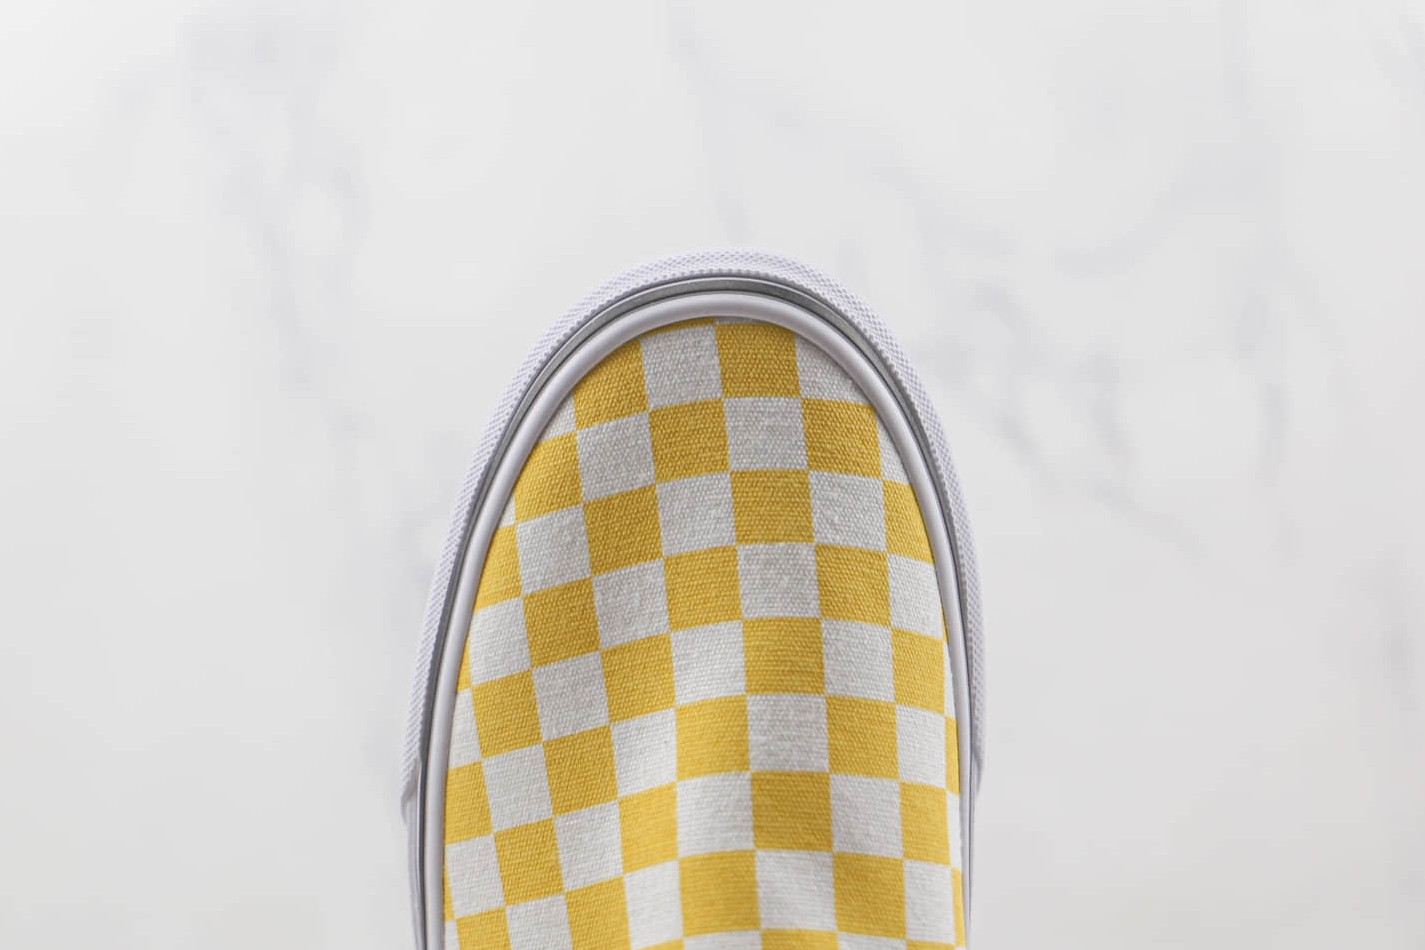 Vans Classic Slip-On 'Checkerboard - Cyber Yellow' VN0A33TB42Z: Stylish Slip-On Shoes for Men - Limited Stock